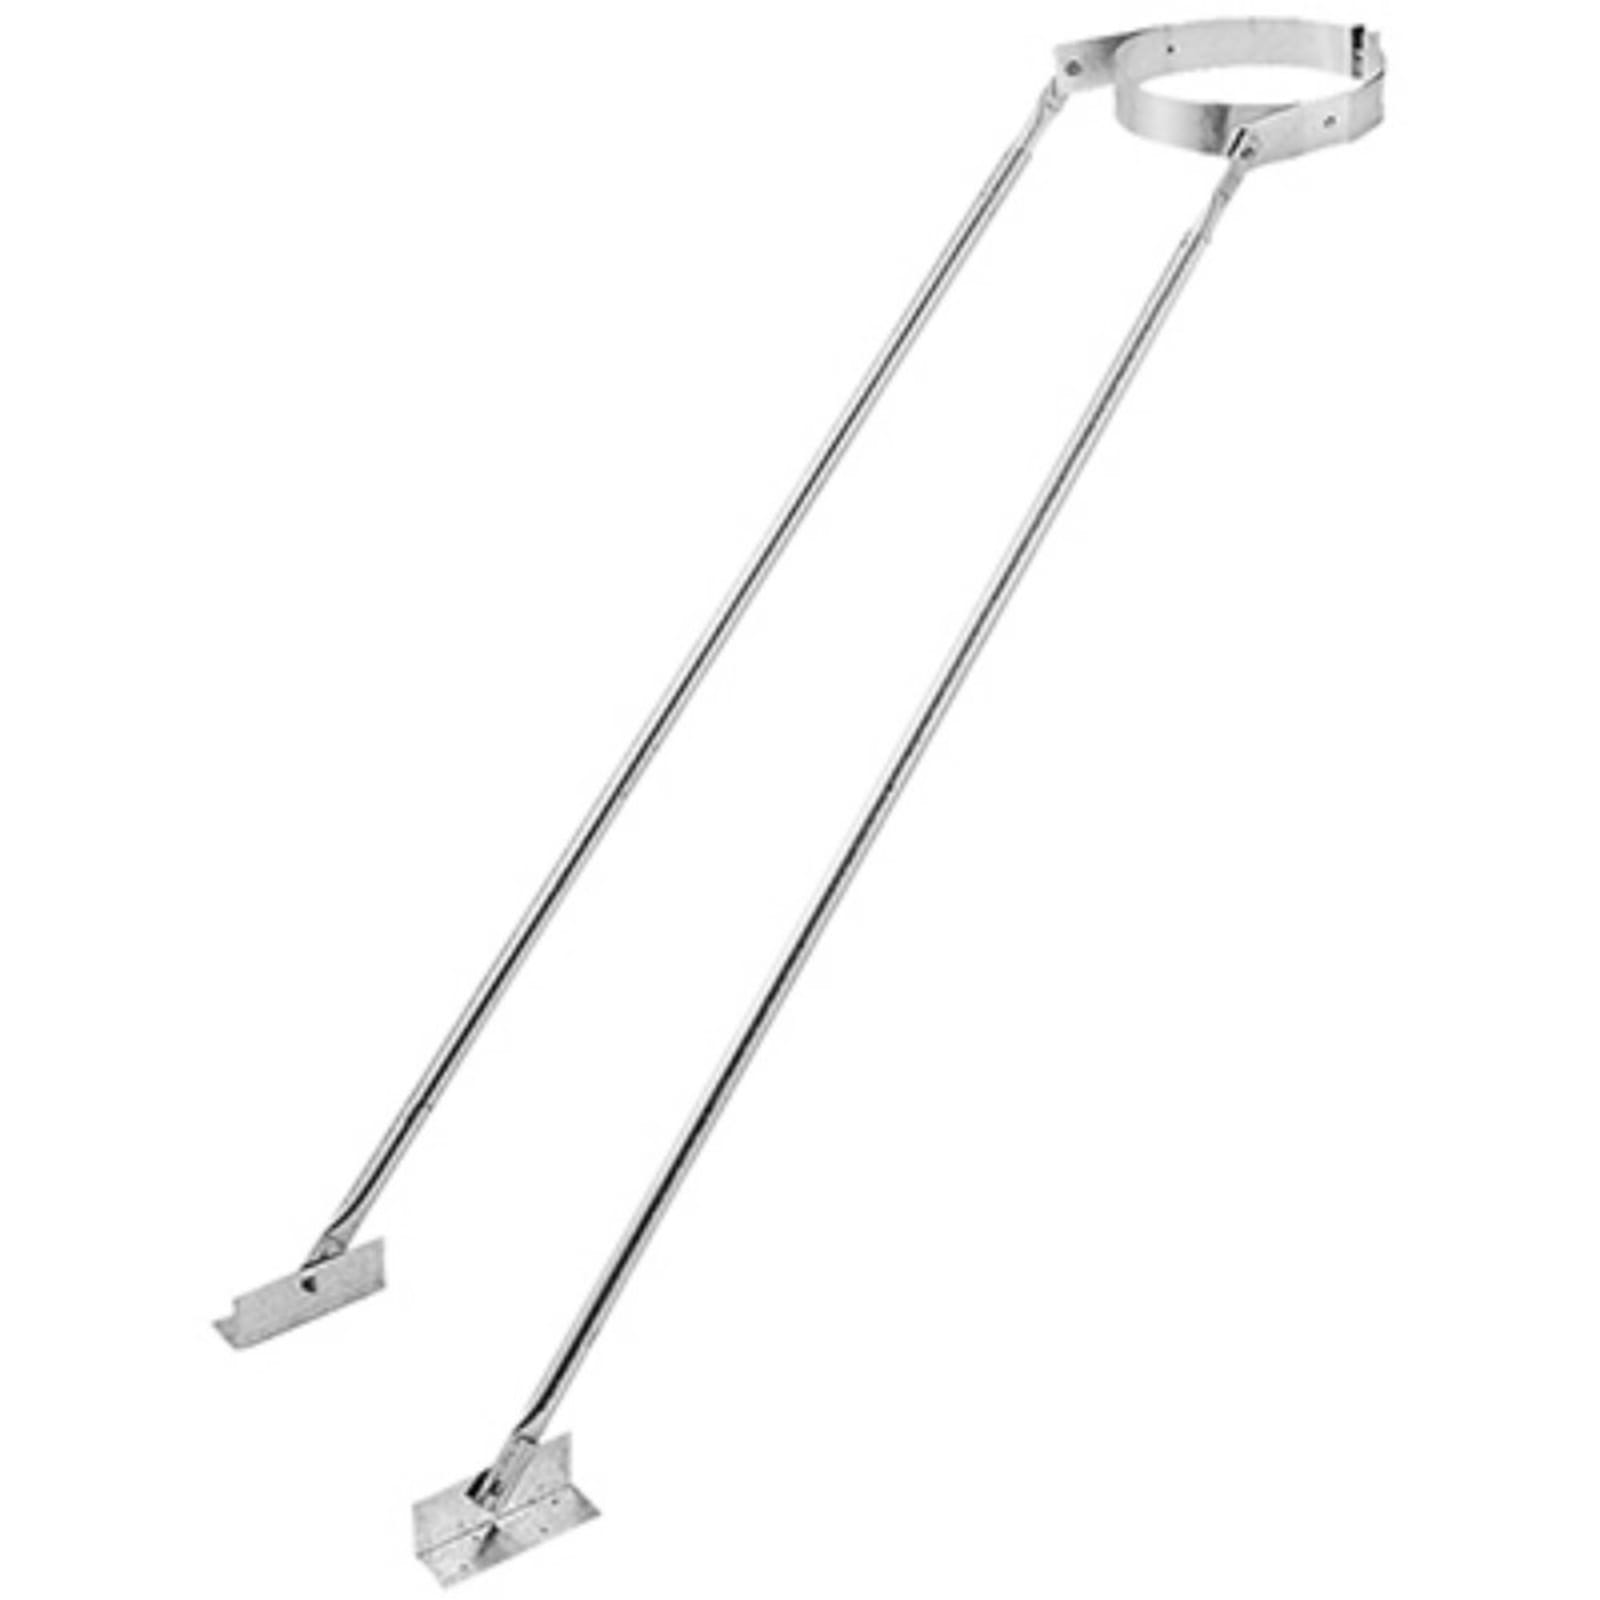 Duraflue DTW Guy wire bracket (requires also Telescopic Support Kit): –  Stovefitter's Warehouse